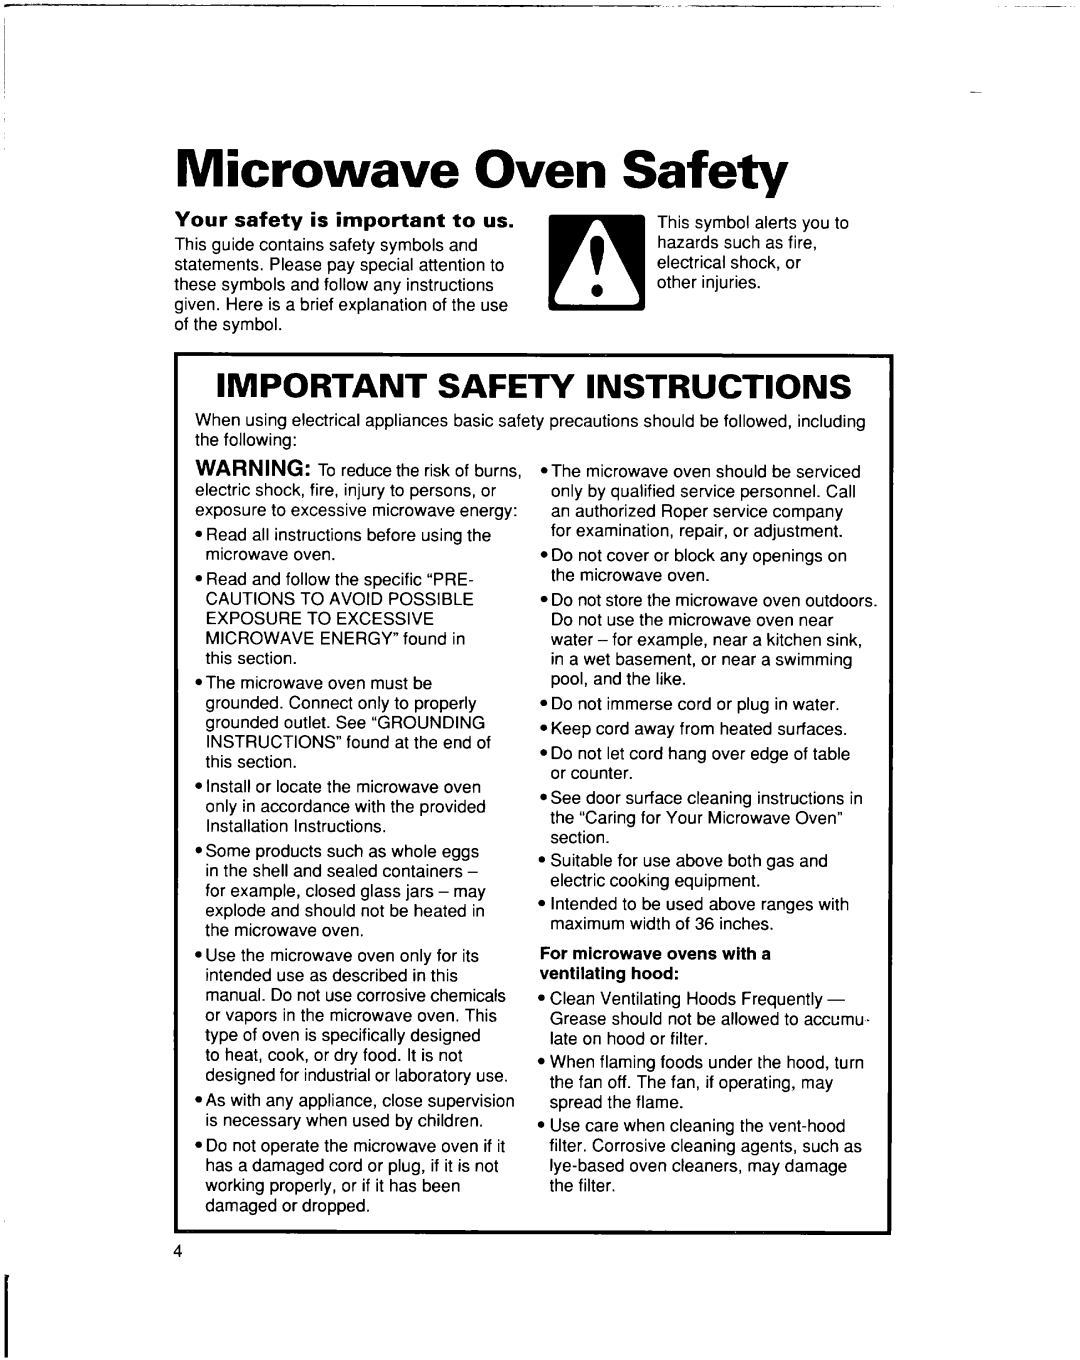 Whirlpool lREB/Q warranty Microwave Oven, Important Safety Instructions, Your safety is important to us 